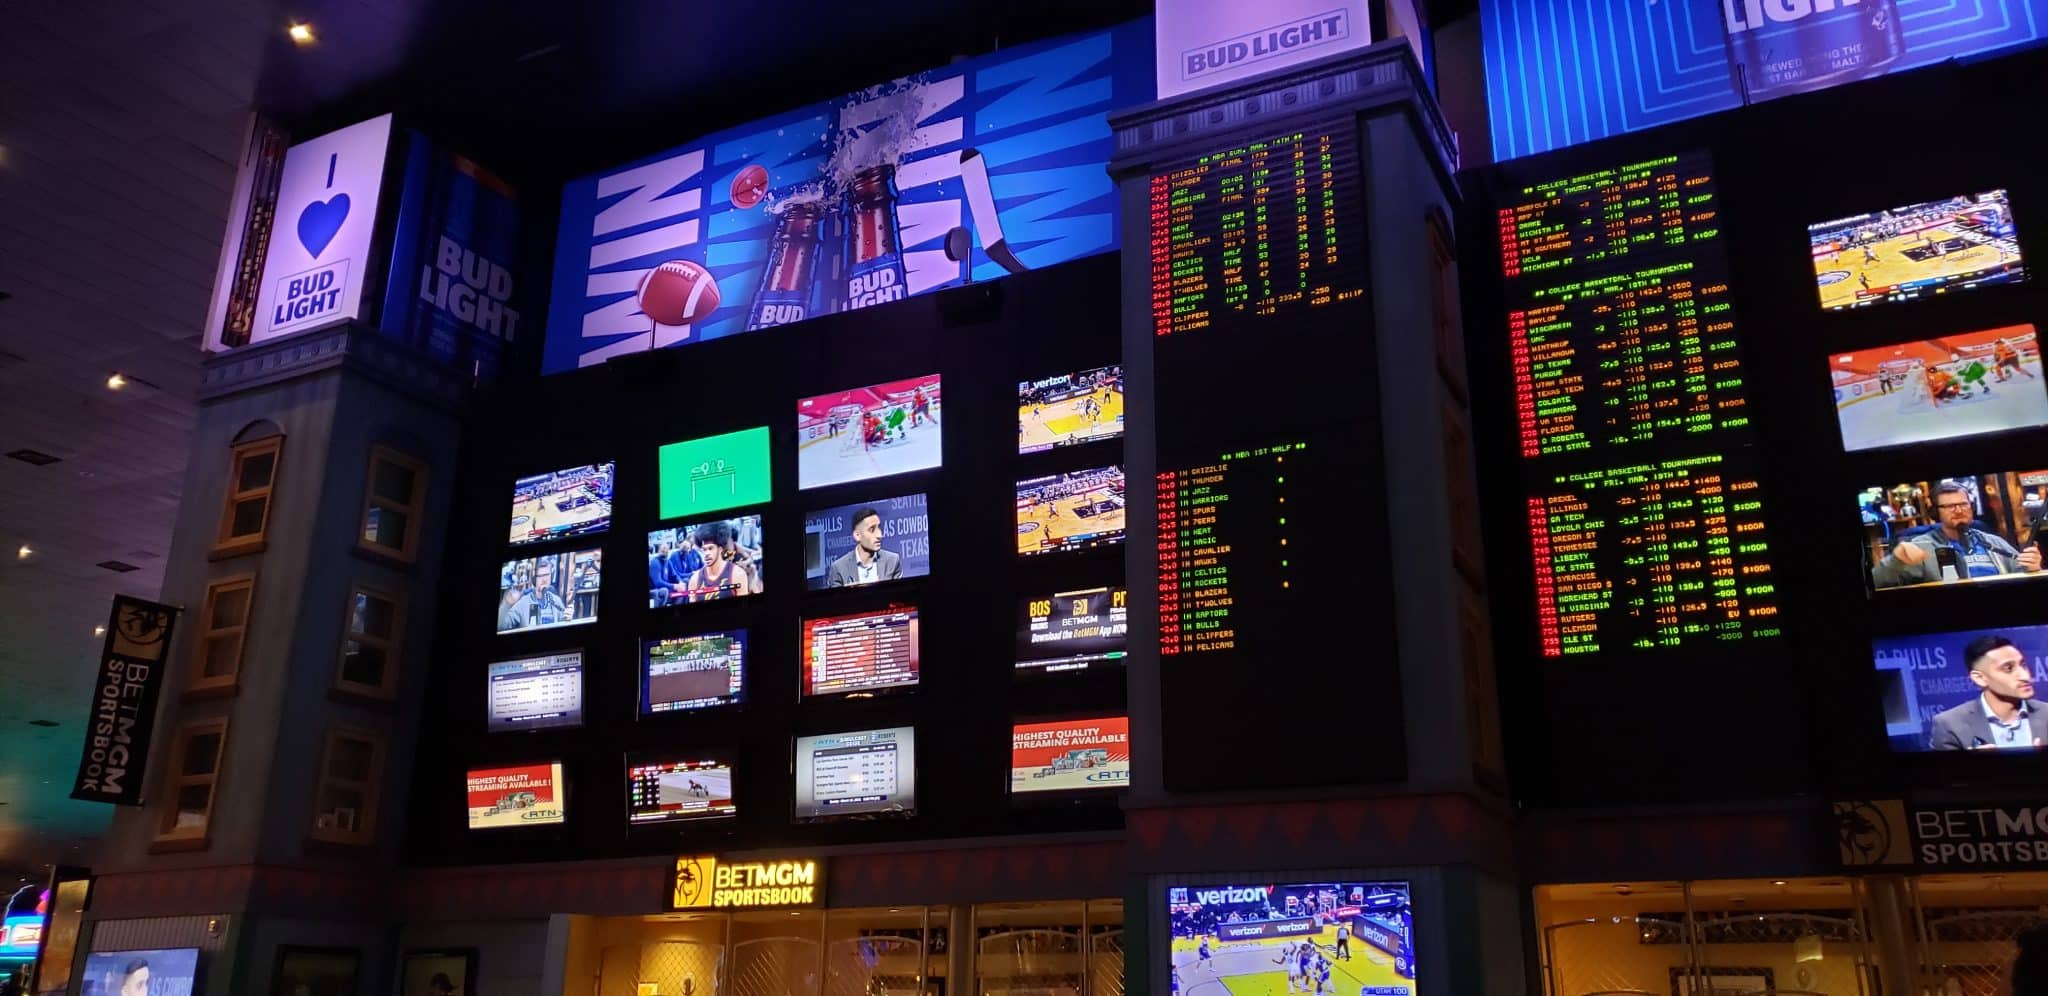 All Bets Are Off: Georgia lawmakers reject sports betting